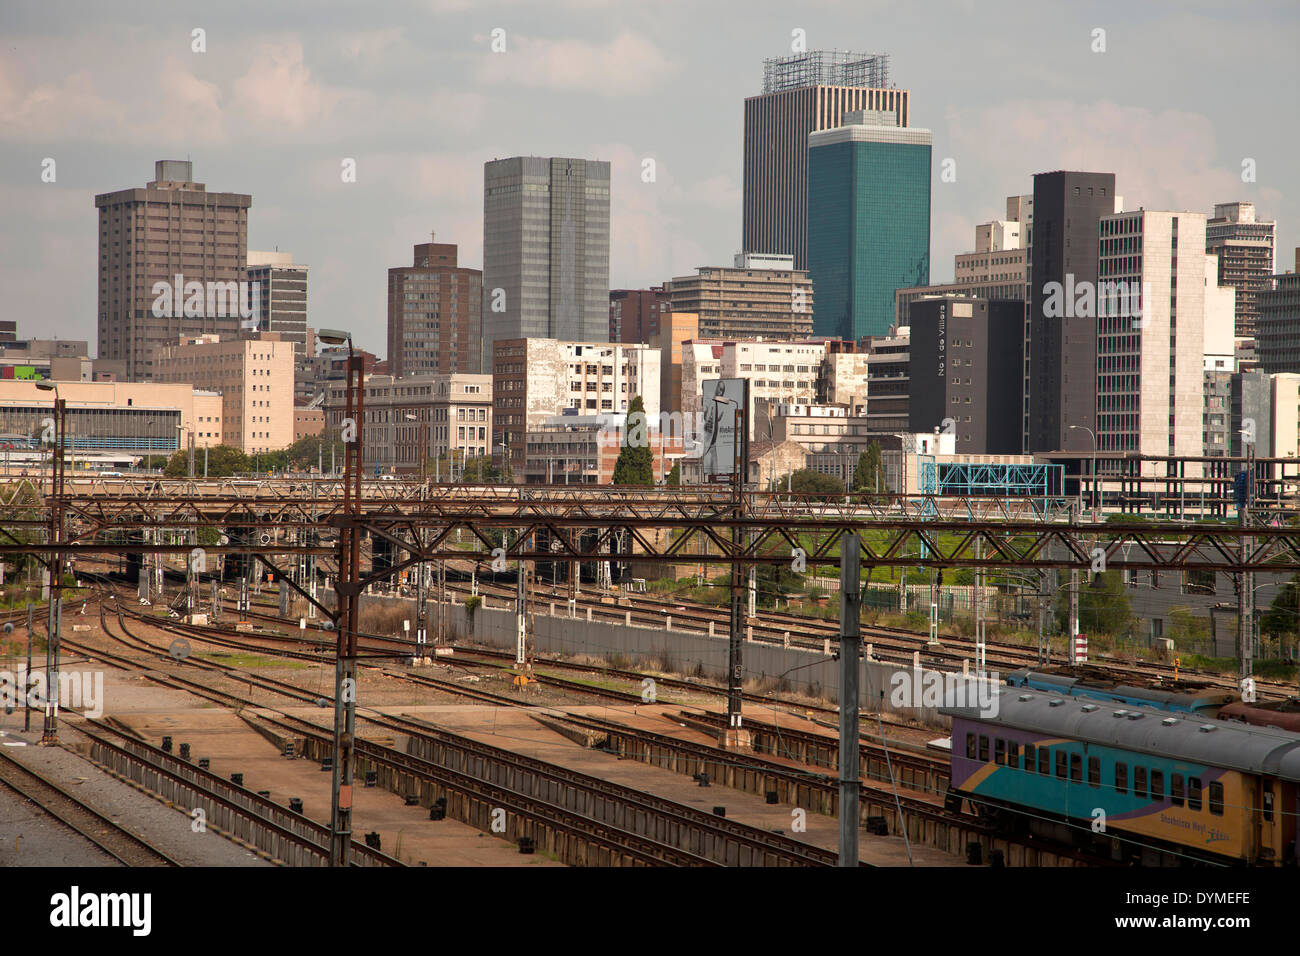 trains and tracks of the central Park Station and the skyline of Johannesburg, Gauteng, South Africa, Africa Stock Photo